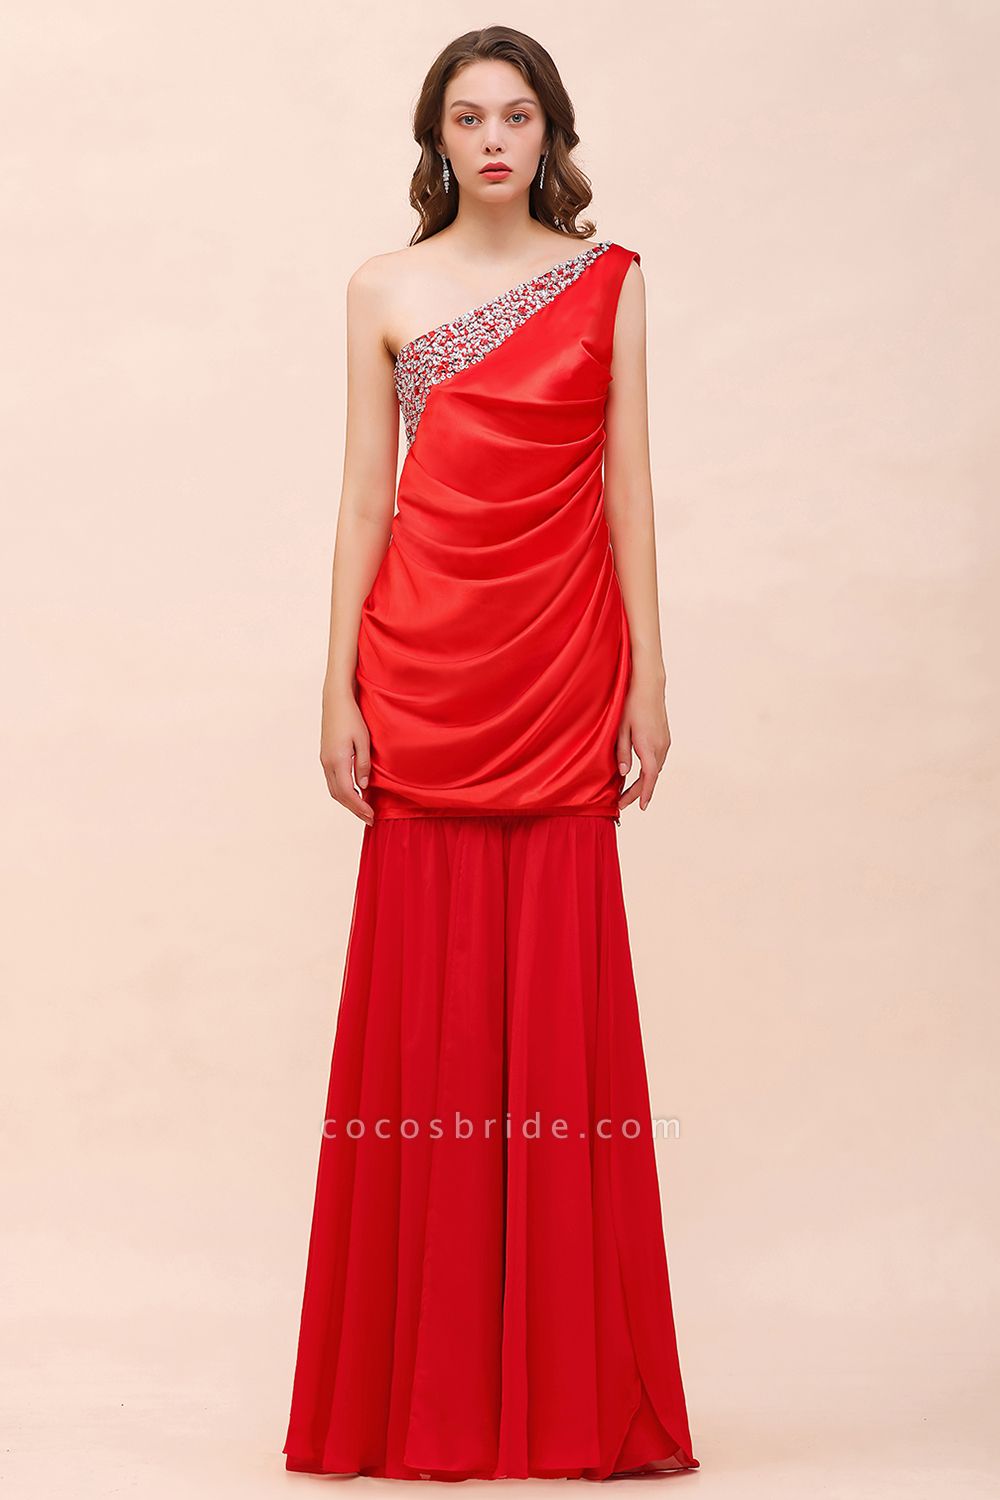 Chic Long One Shoulder Beading Ruffle Bridesmaid Dress with Detachable Skirt